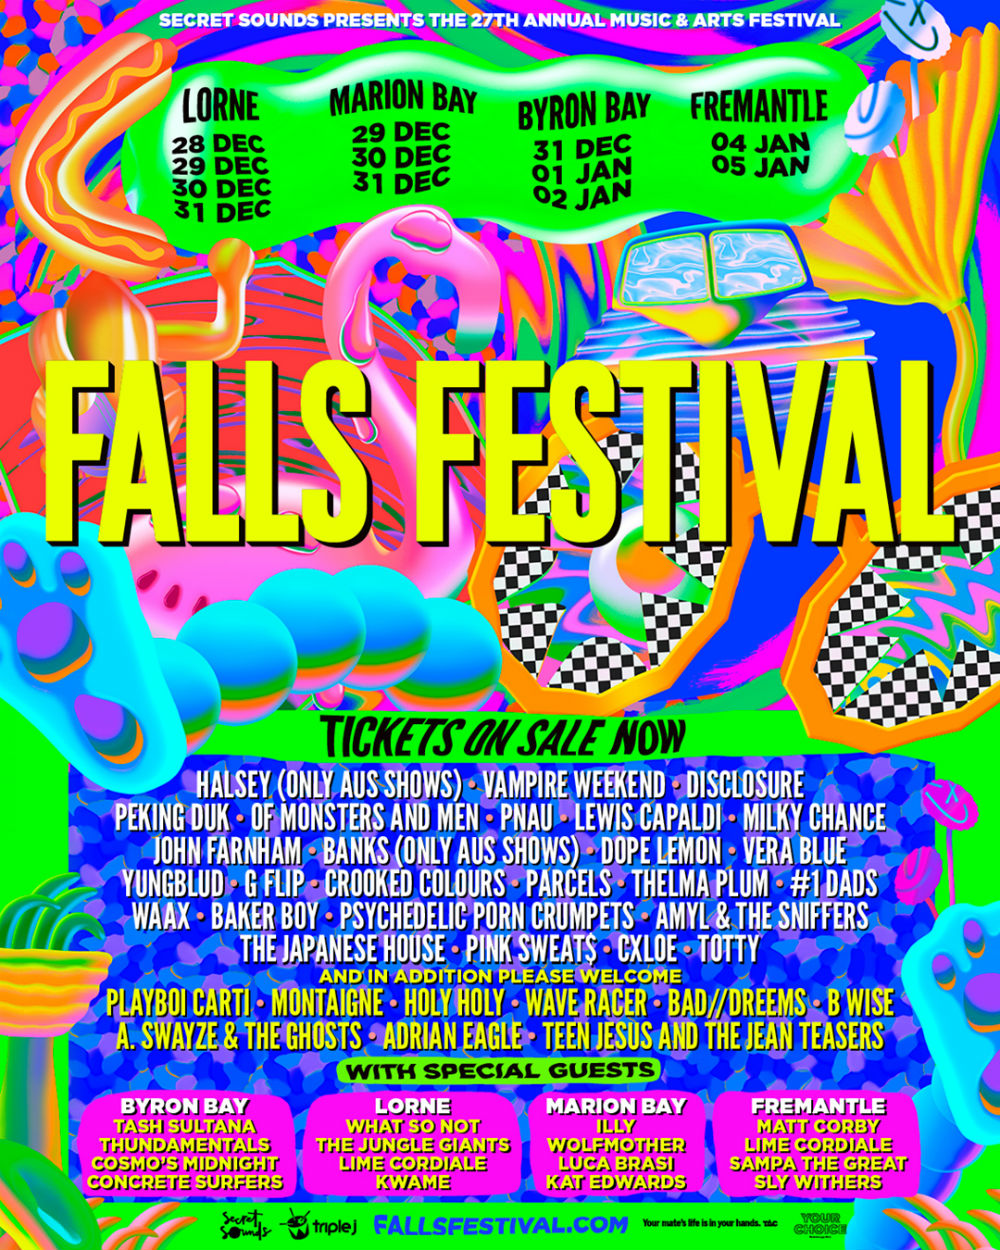 Falls Fest Second Lineup Announcement Is Here Ft. Playboi Carti, Bad